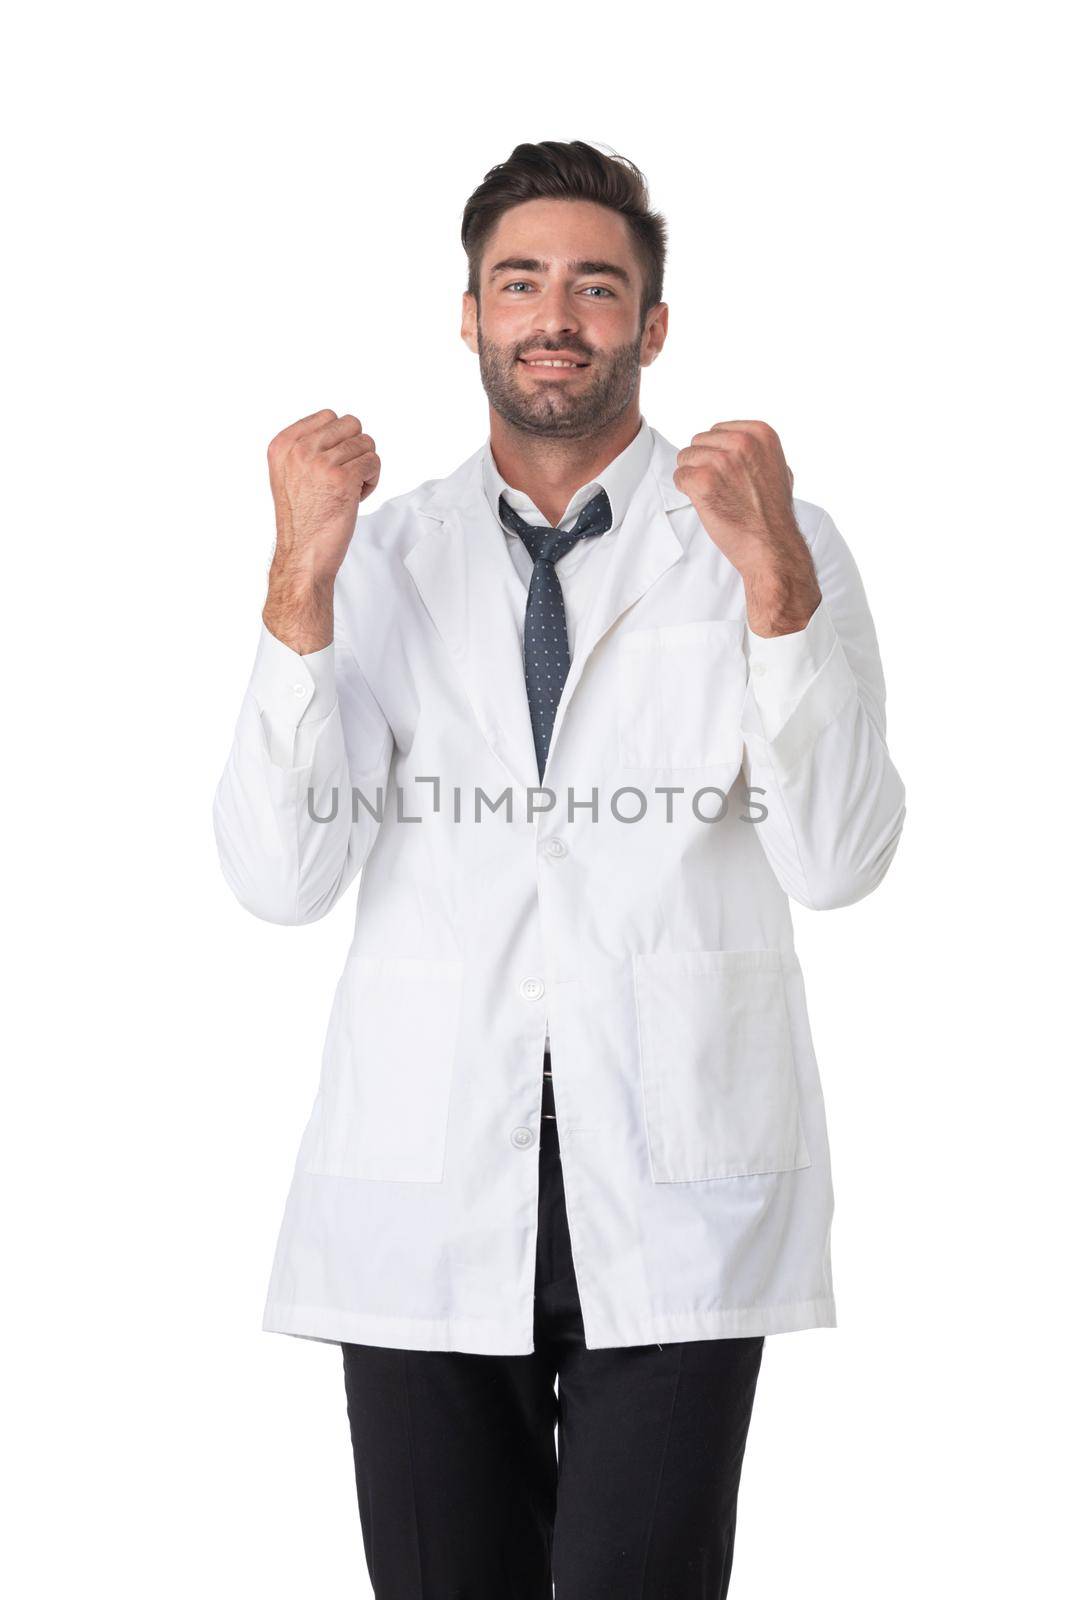 Portrait of doctor man holding fist success sign isolated on white background